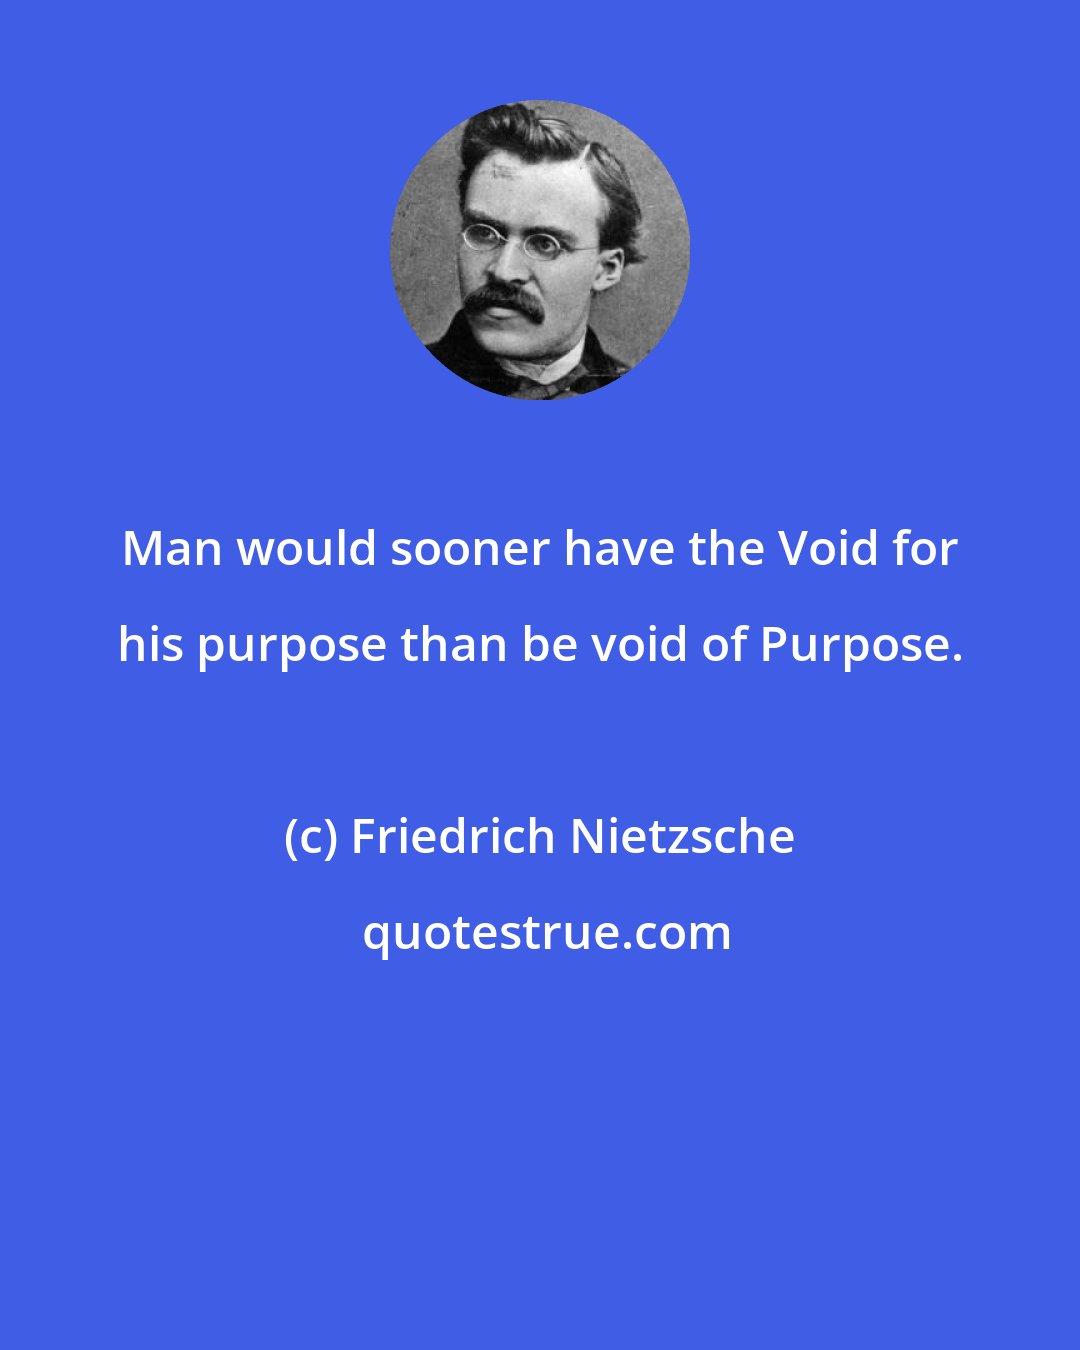 Friedrich Nietzsche: Man would sooner have the Void for his purpose than be void of Purpose.